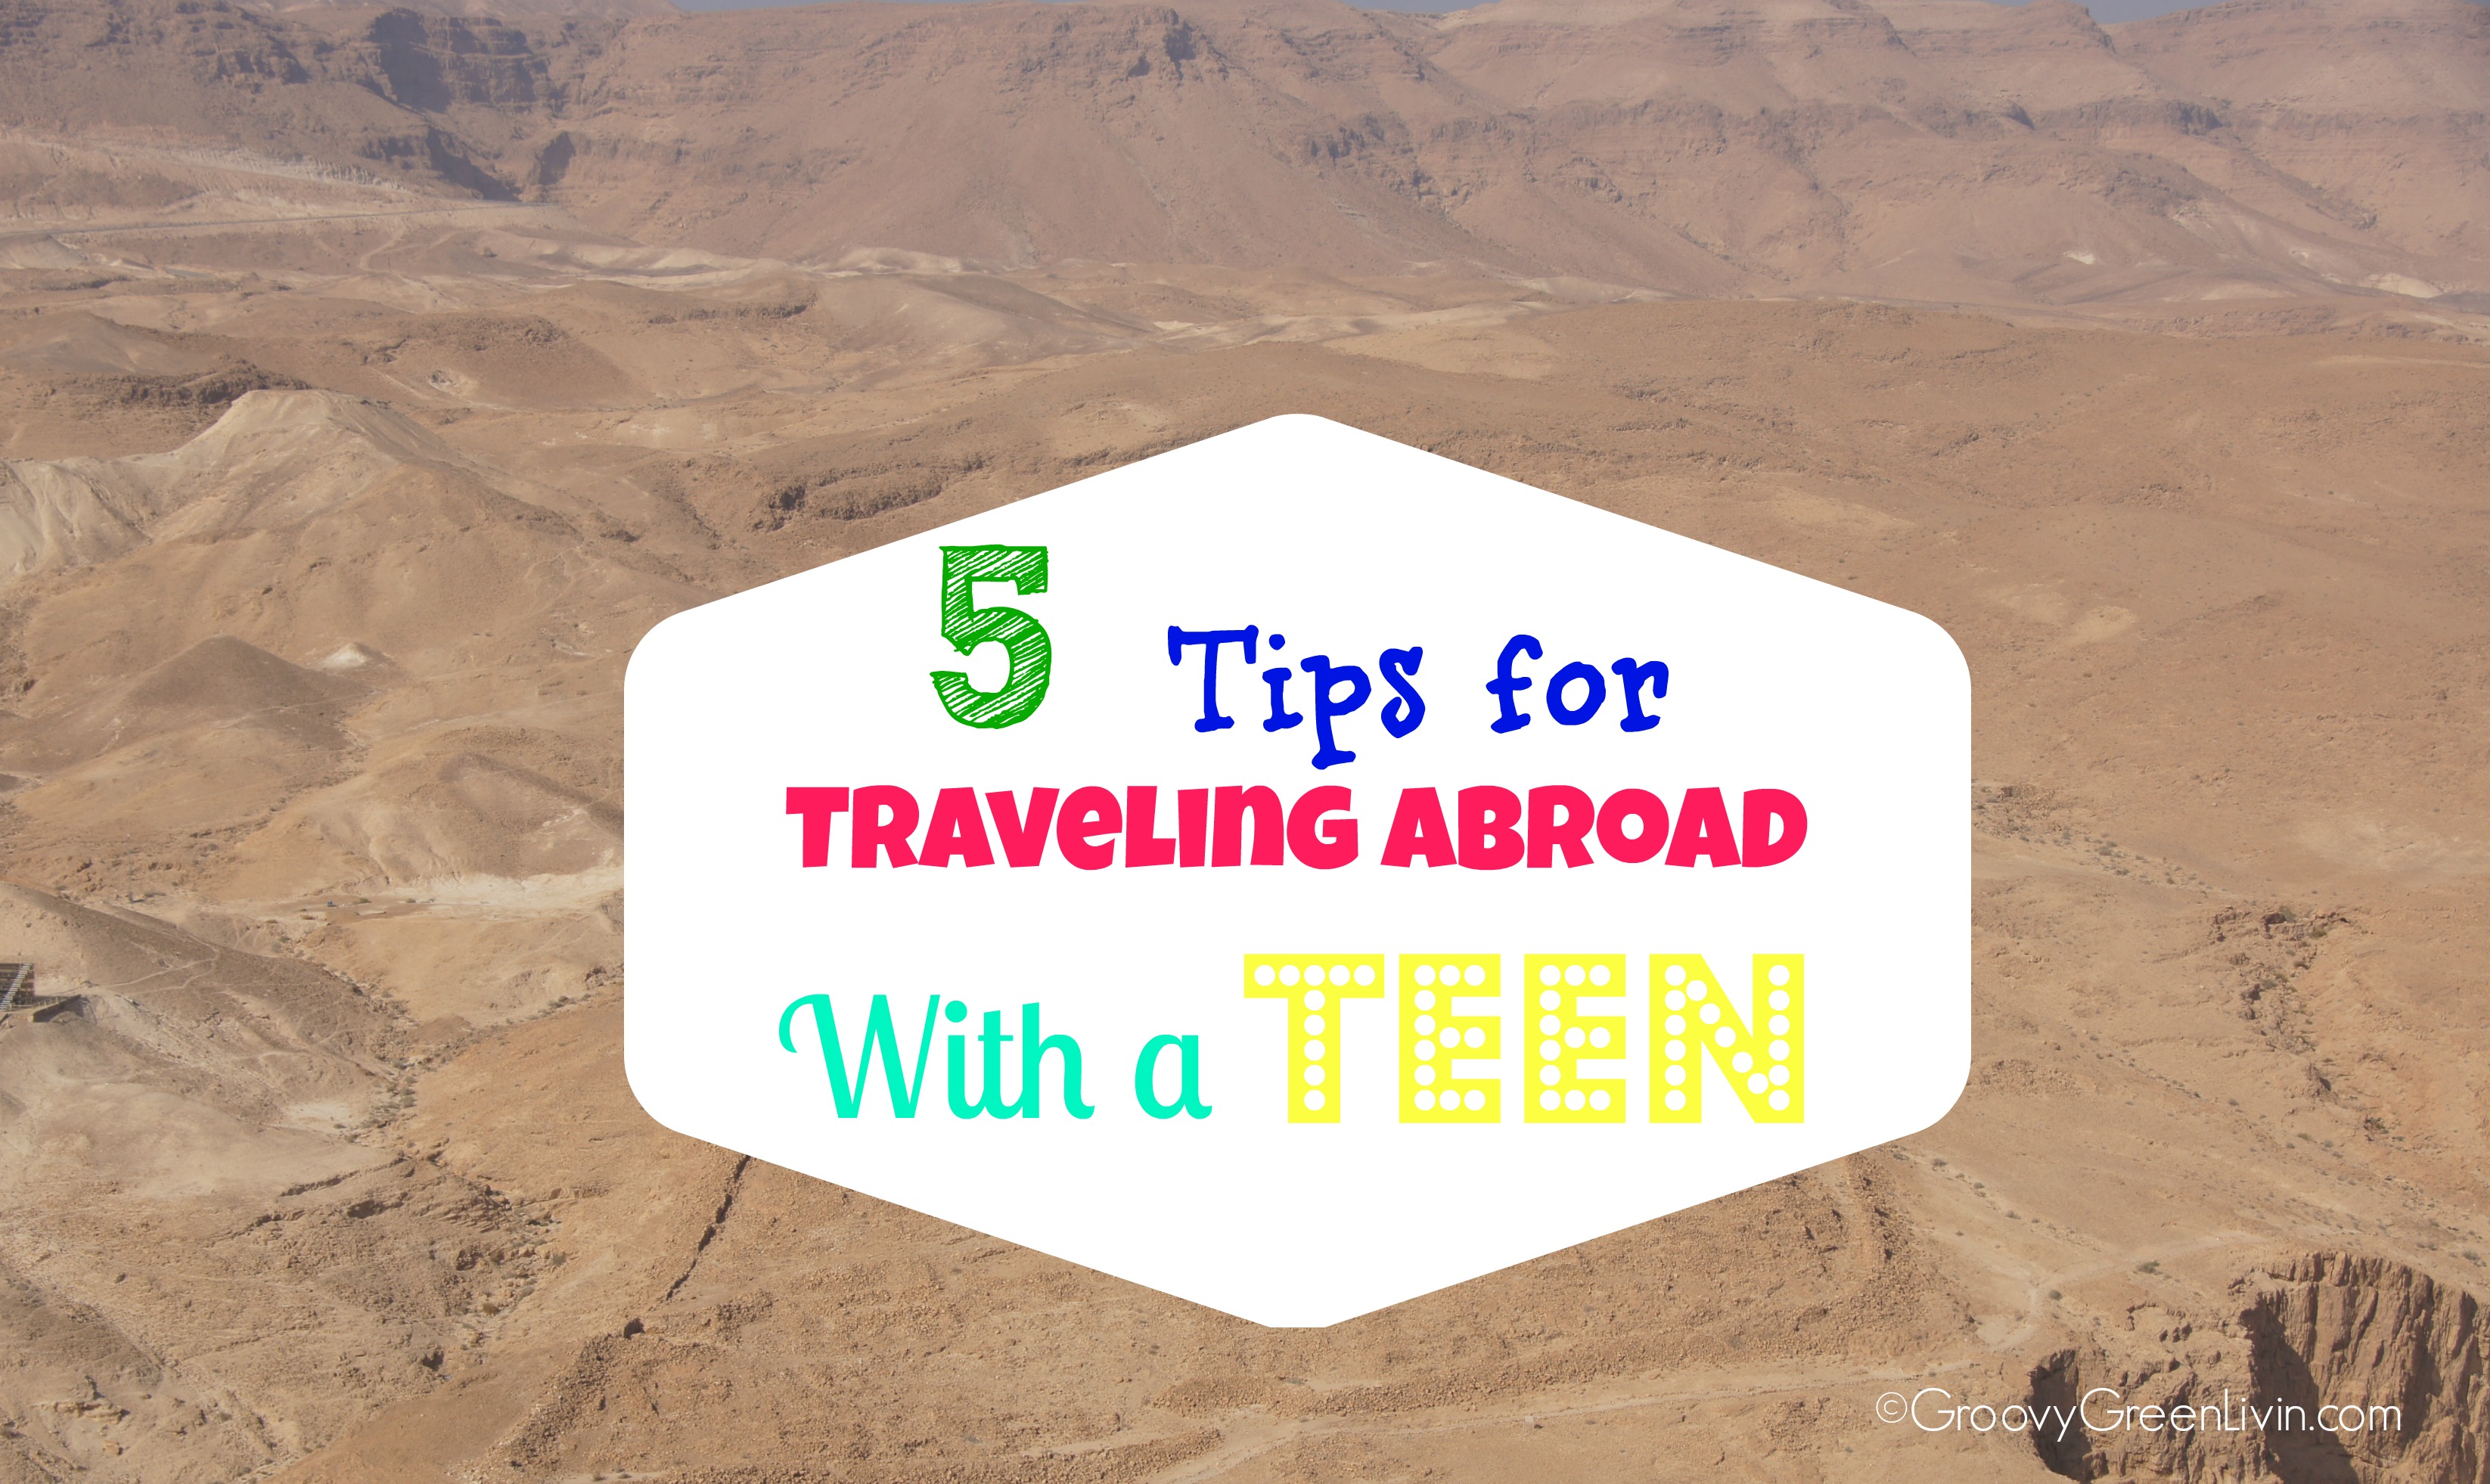 5 Tips for Traveling Abroad With a Teen